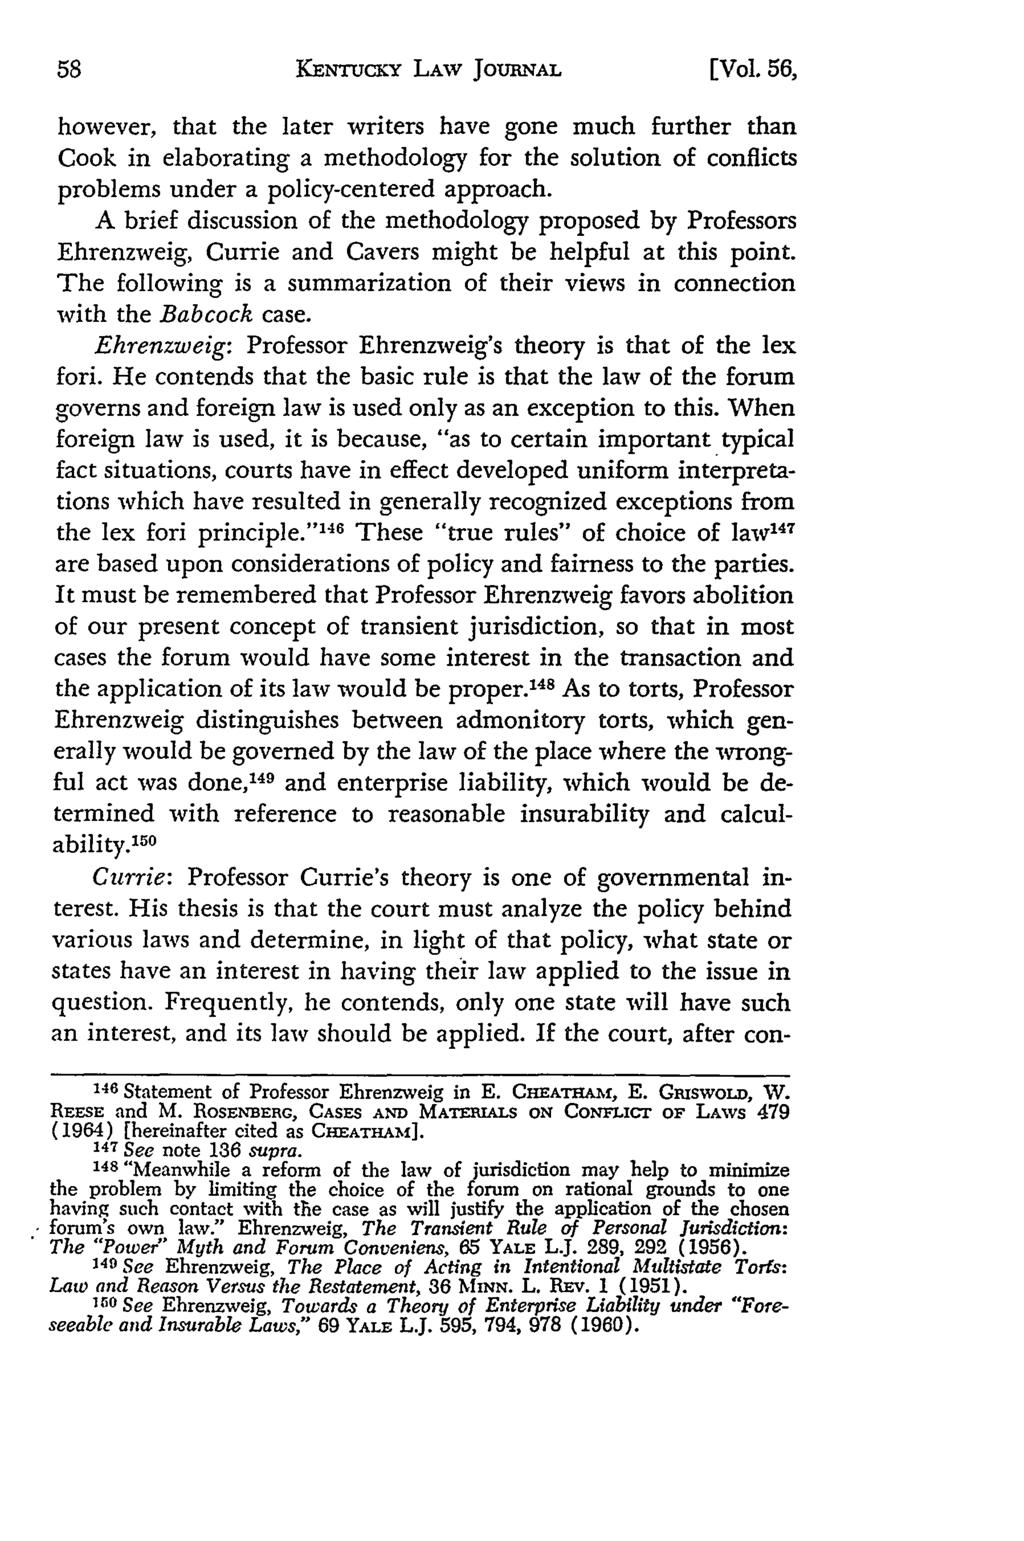 KENTUcKY LAW JOURNAL [Vol. 56, however, that the later writers have gone much further than Cook in elaborating a methodology for the solution of conflicts problems under a policy-centered approach.